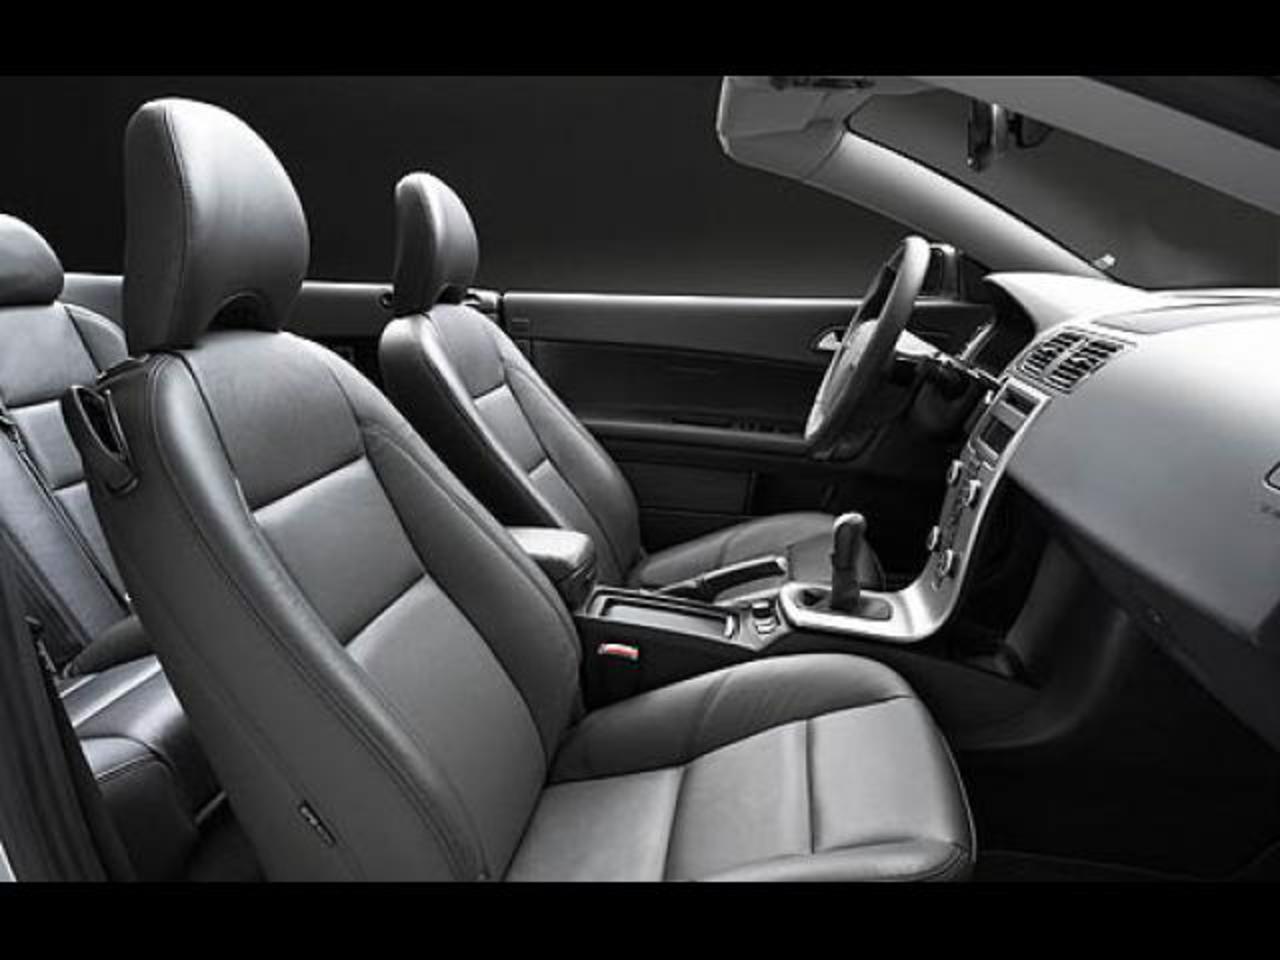 Volvo C70 24 T. View Download Wallpaper. 640x480. Comments